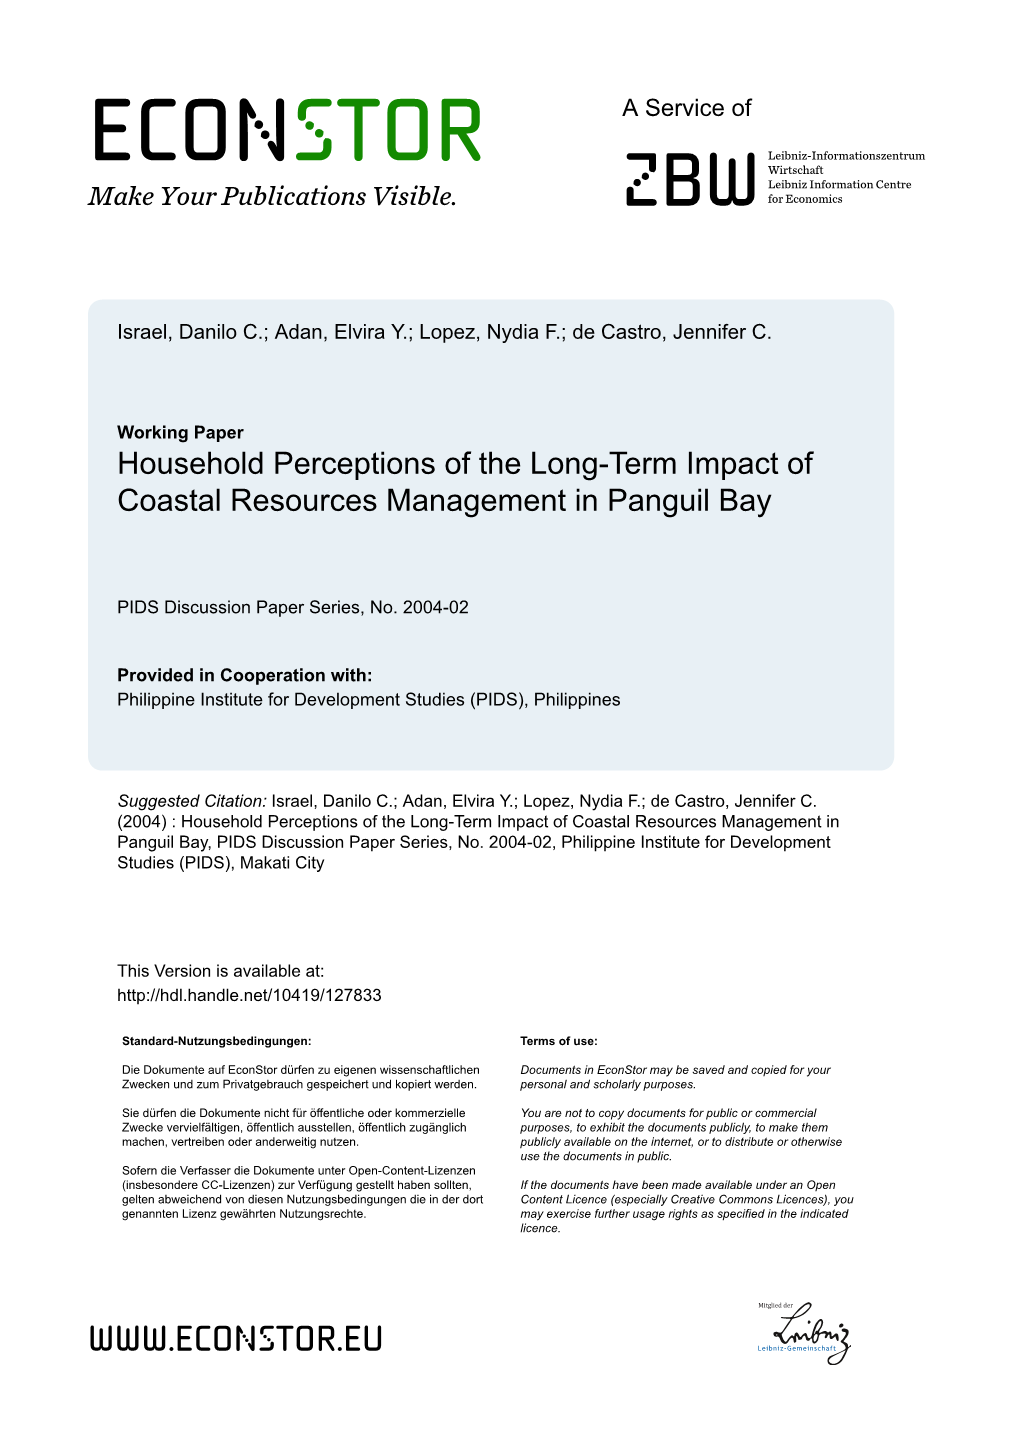 Household Perceptions of the Long-Term Impact of Coastal Resources Management in Panguil Bay